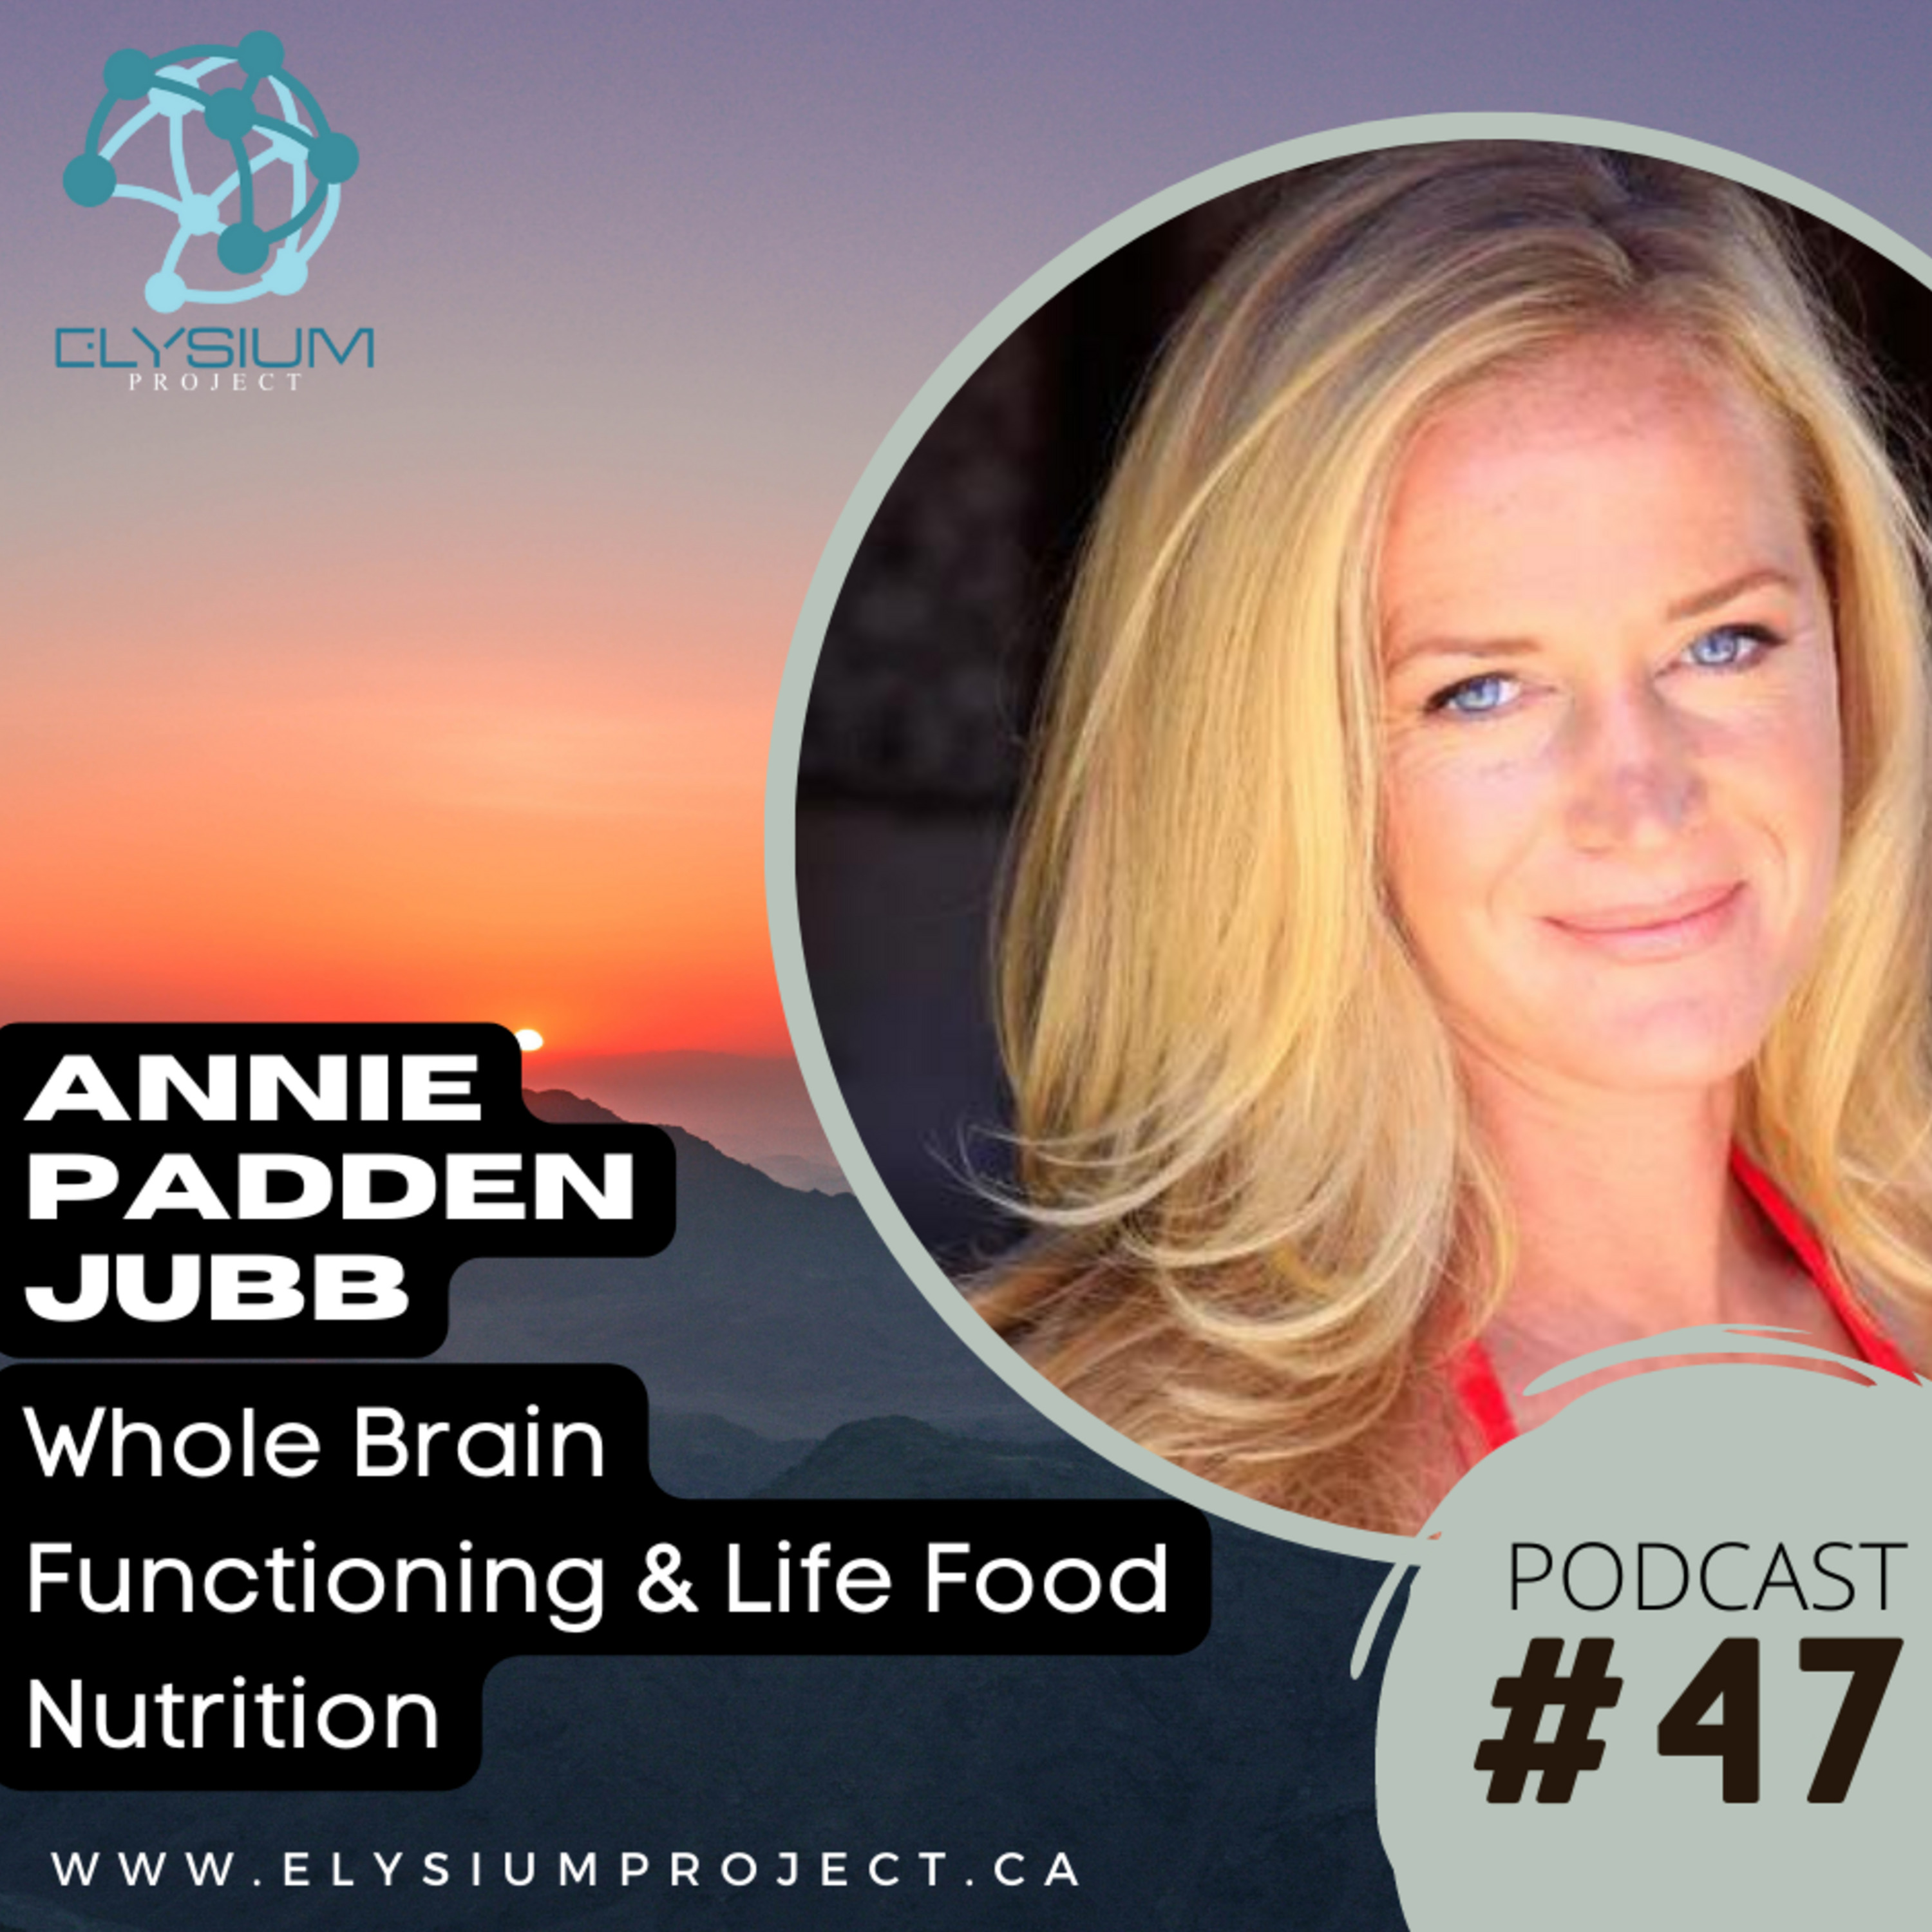 Episode 47: Whole Brain Functioning and LifeFood Nutrition